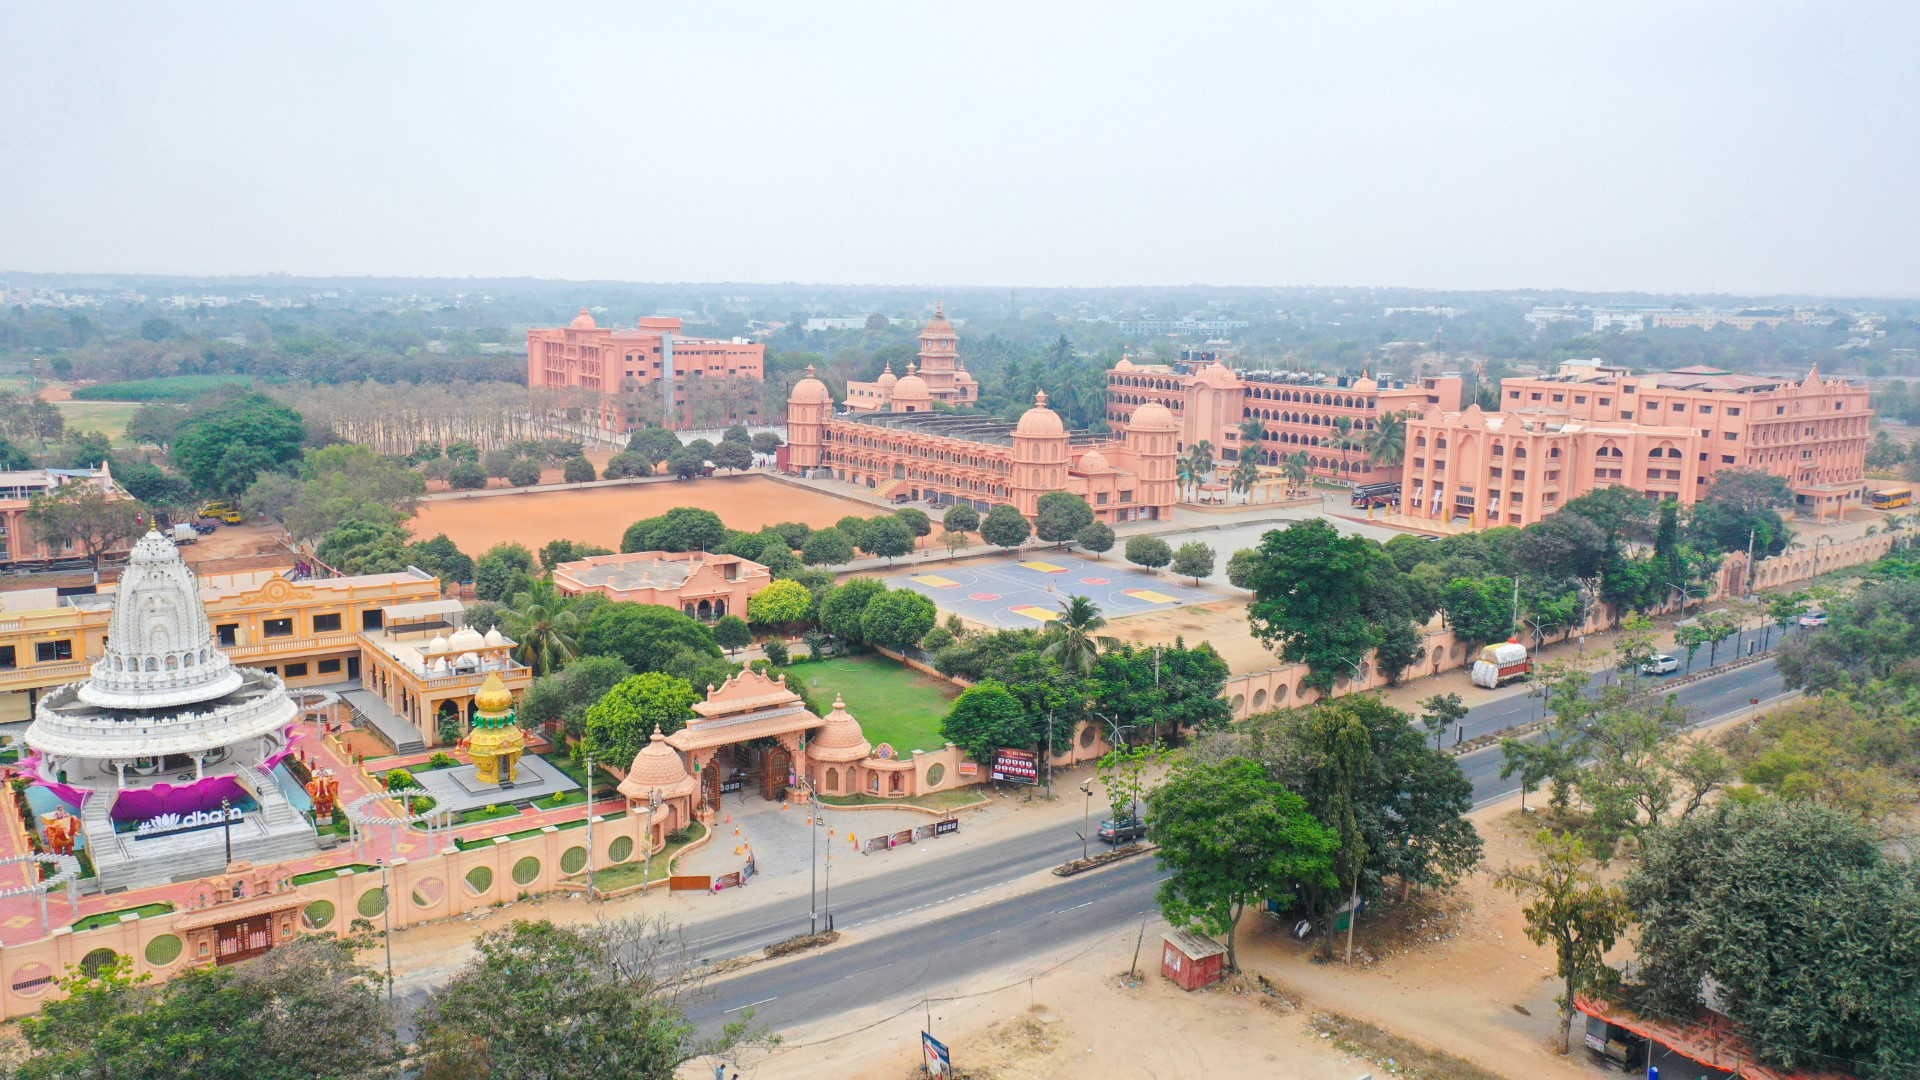 It’s Really A Great Boon To Spend Every Single Day At Shree Swaminarayan Gurukul Residential Campus.